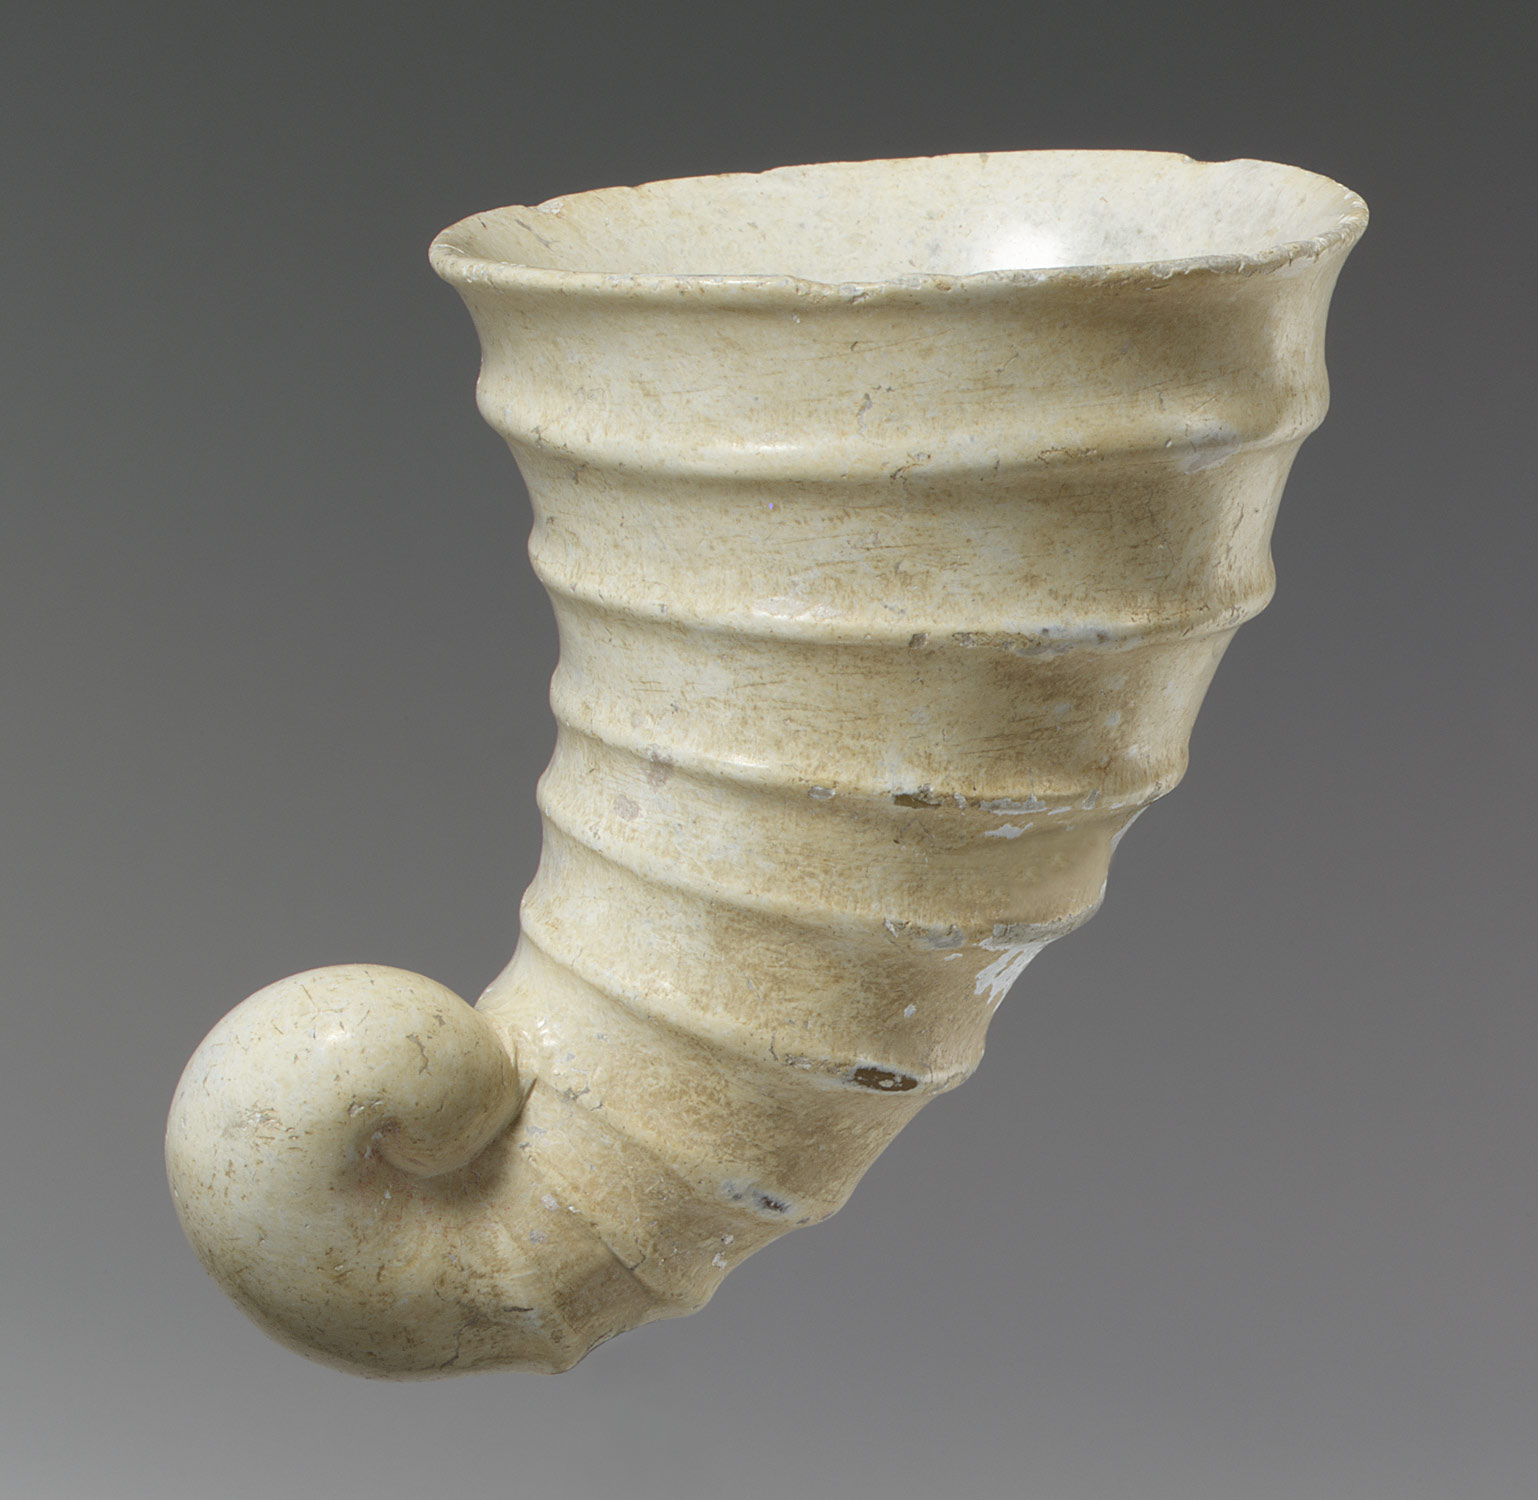 Vessel in the form of a horn